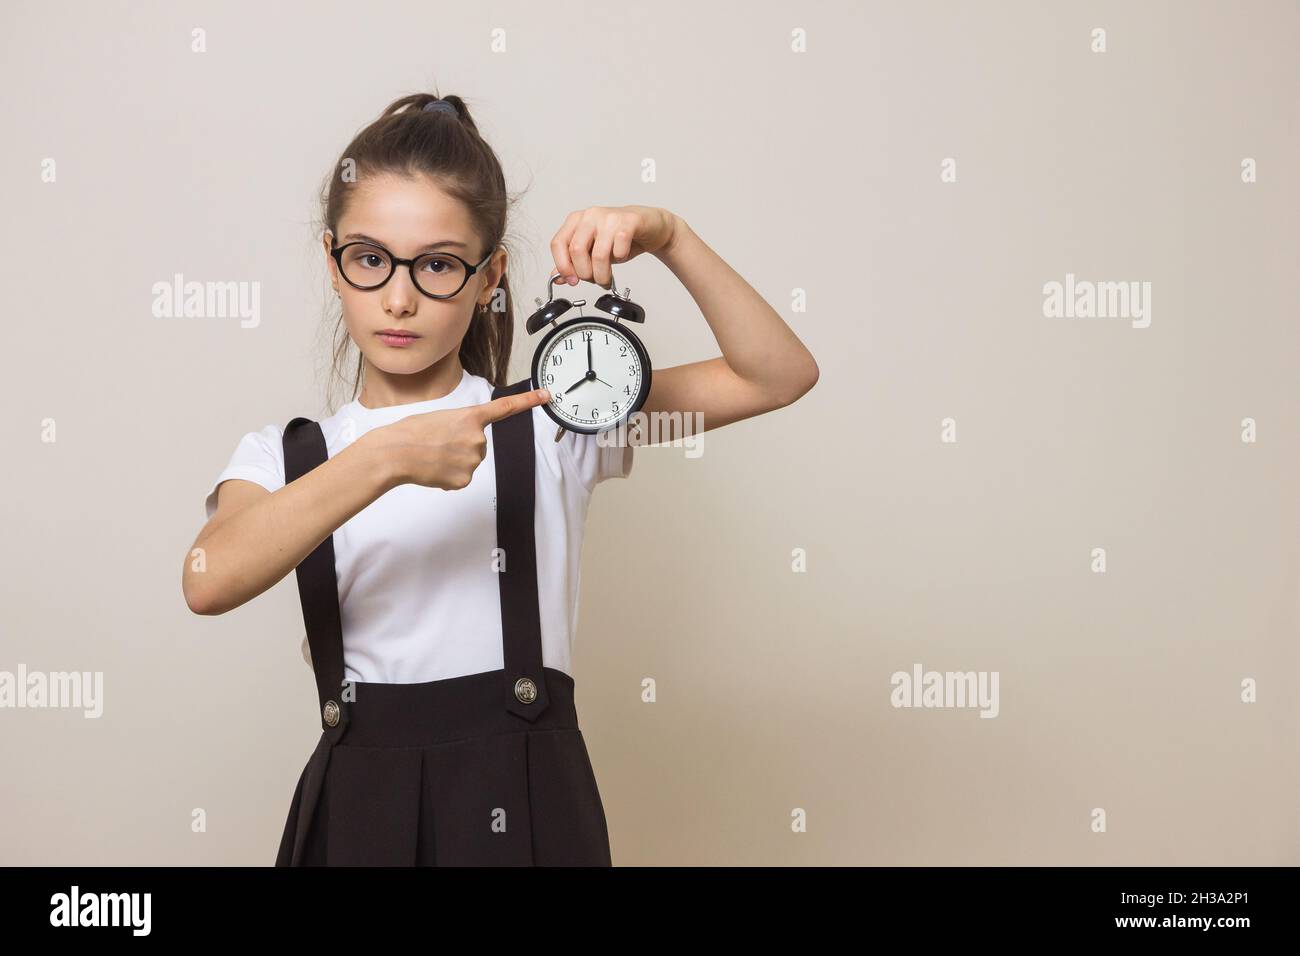 Girl holding an alarm clock. Girl shows her finger at the clock. Space for text Stock Photo